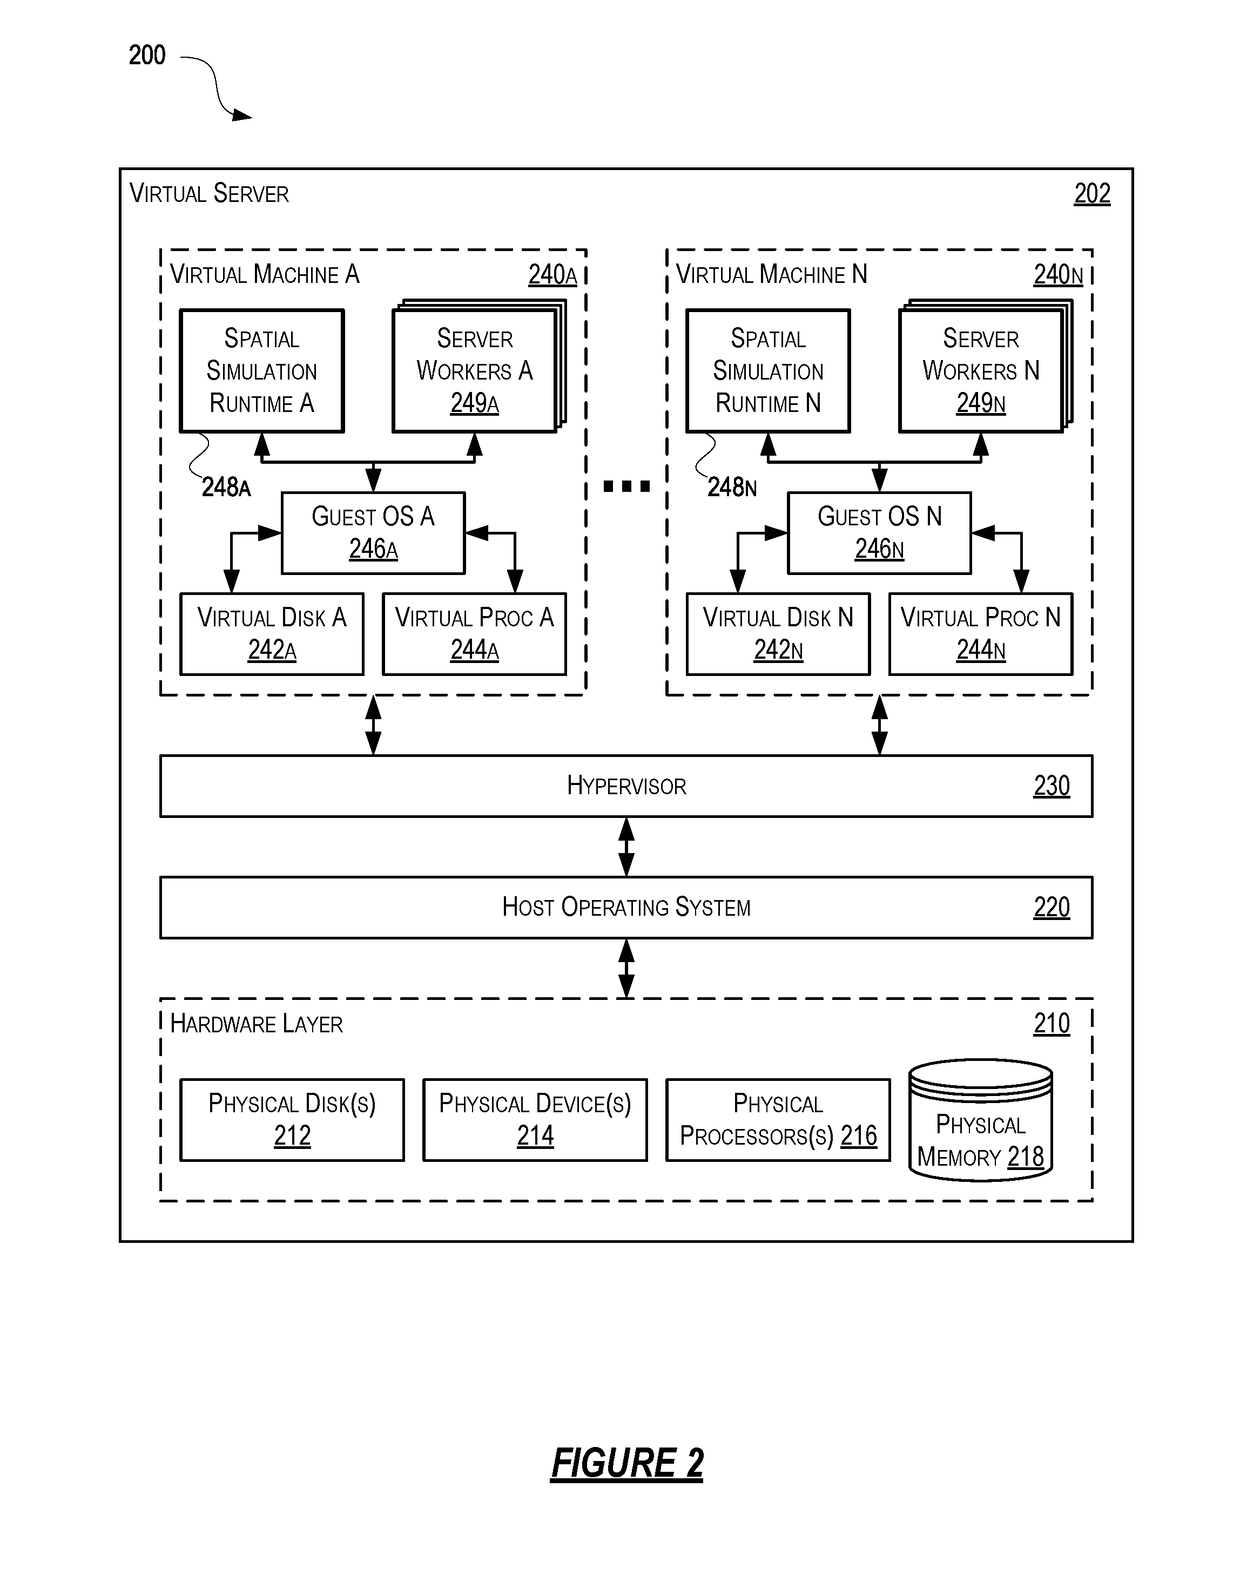 Load Balancing Systems and Methods